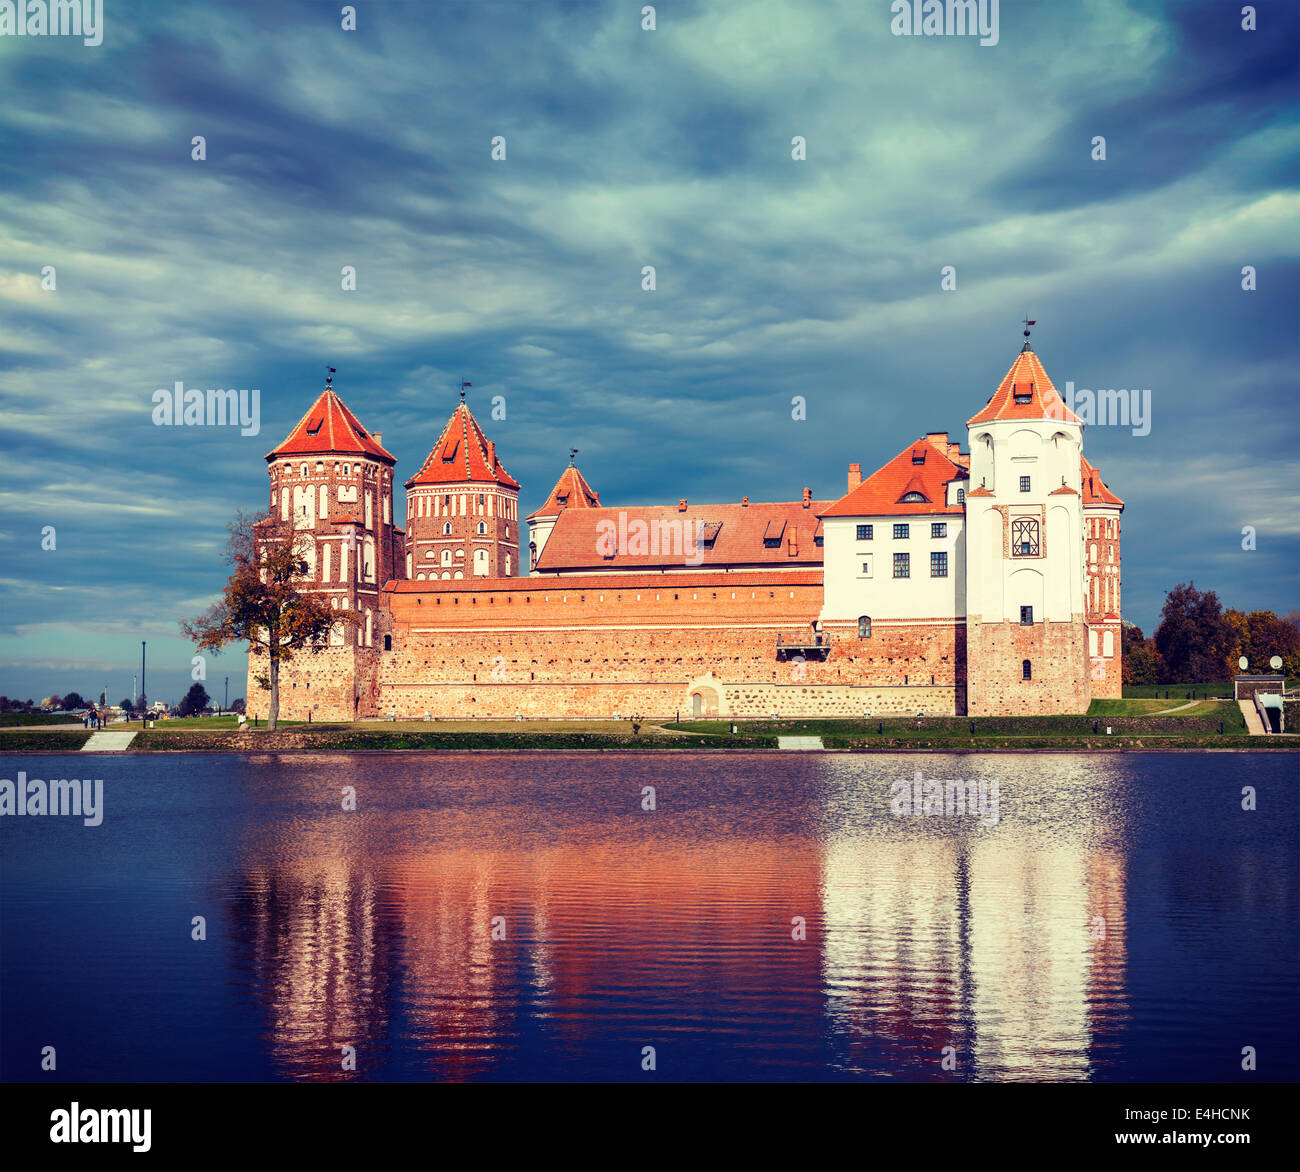 Vintage retro effect filtered hipster style travel image of medieval Mir castle famous landmark in town Mir, Belarus Stock Photo